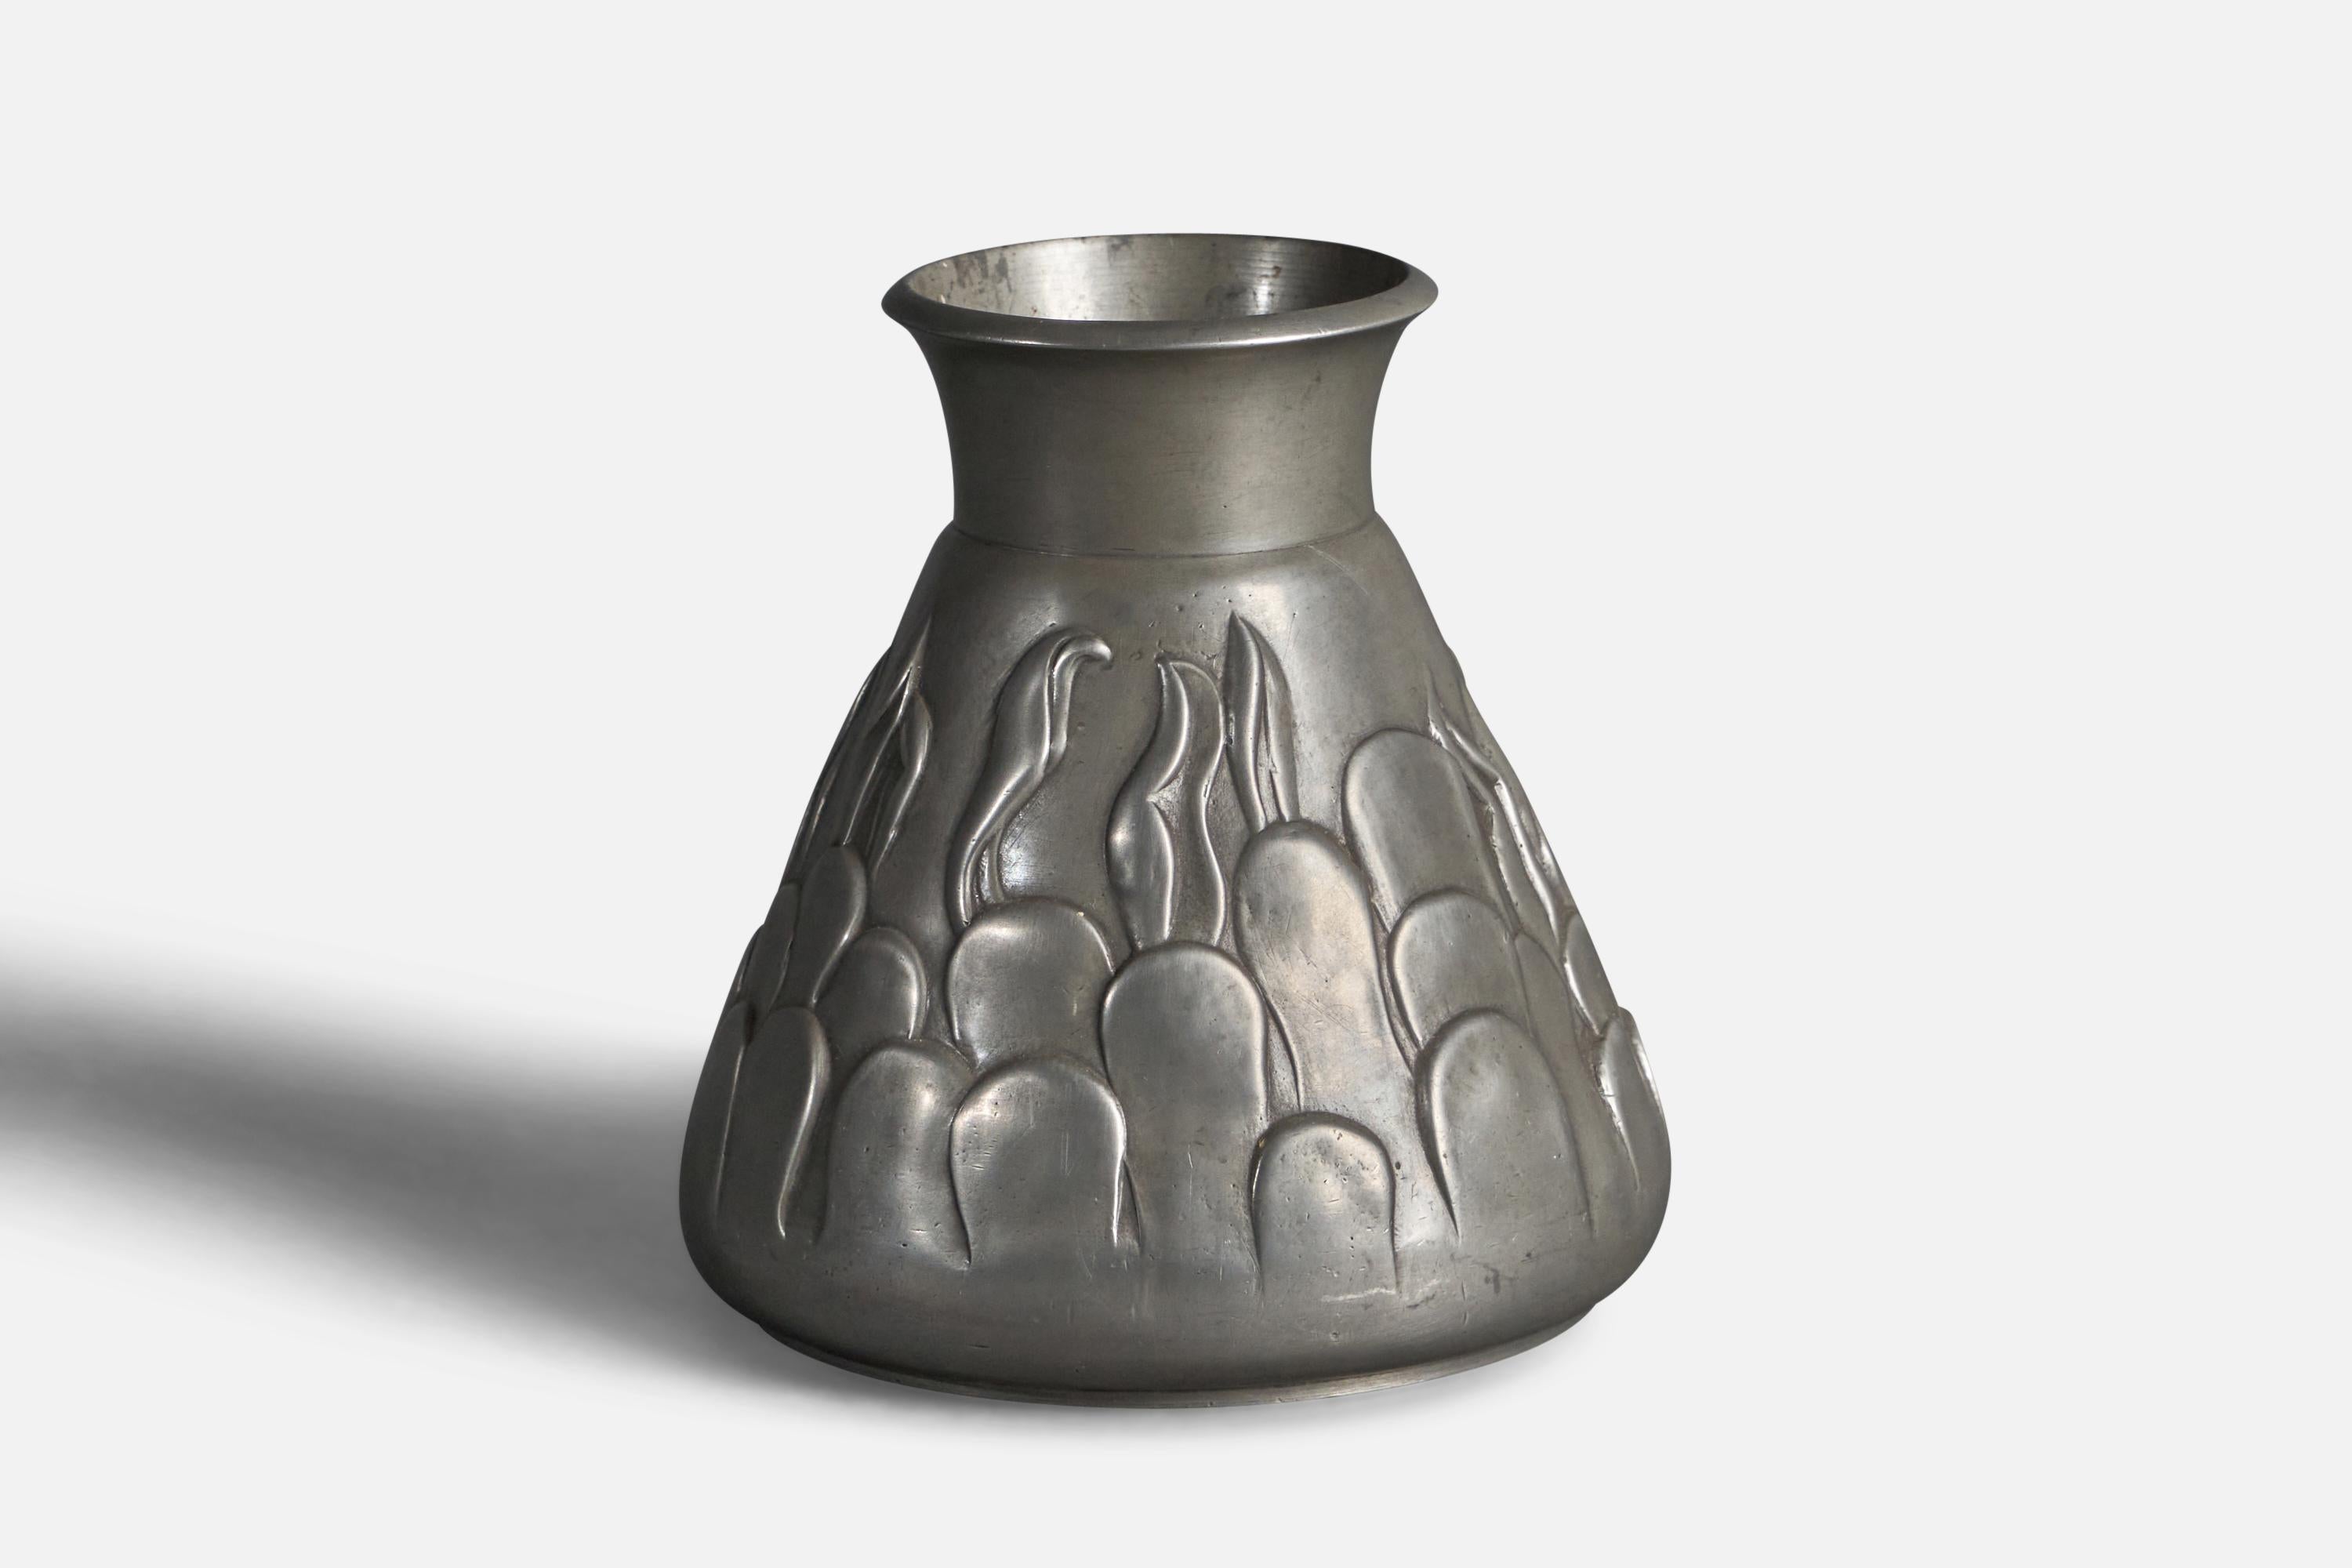 A pewter vase designed and produced in Denmark, 1940s.